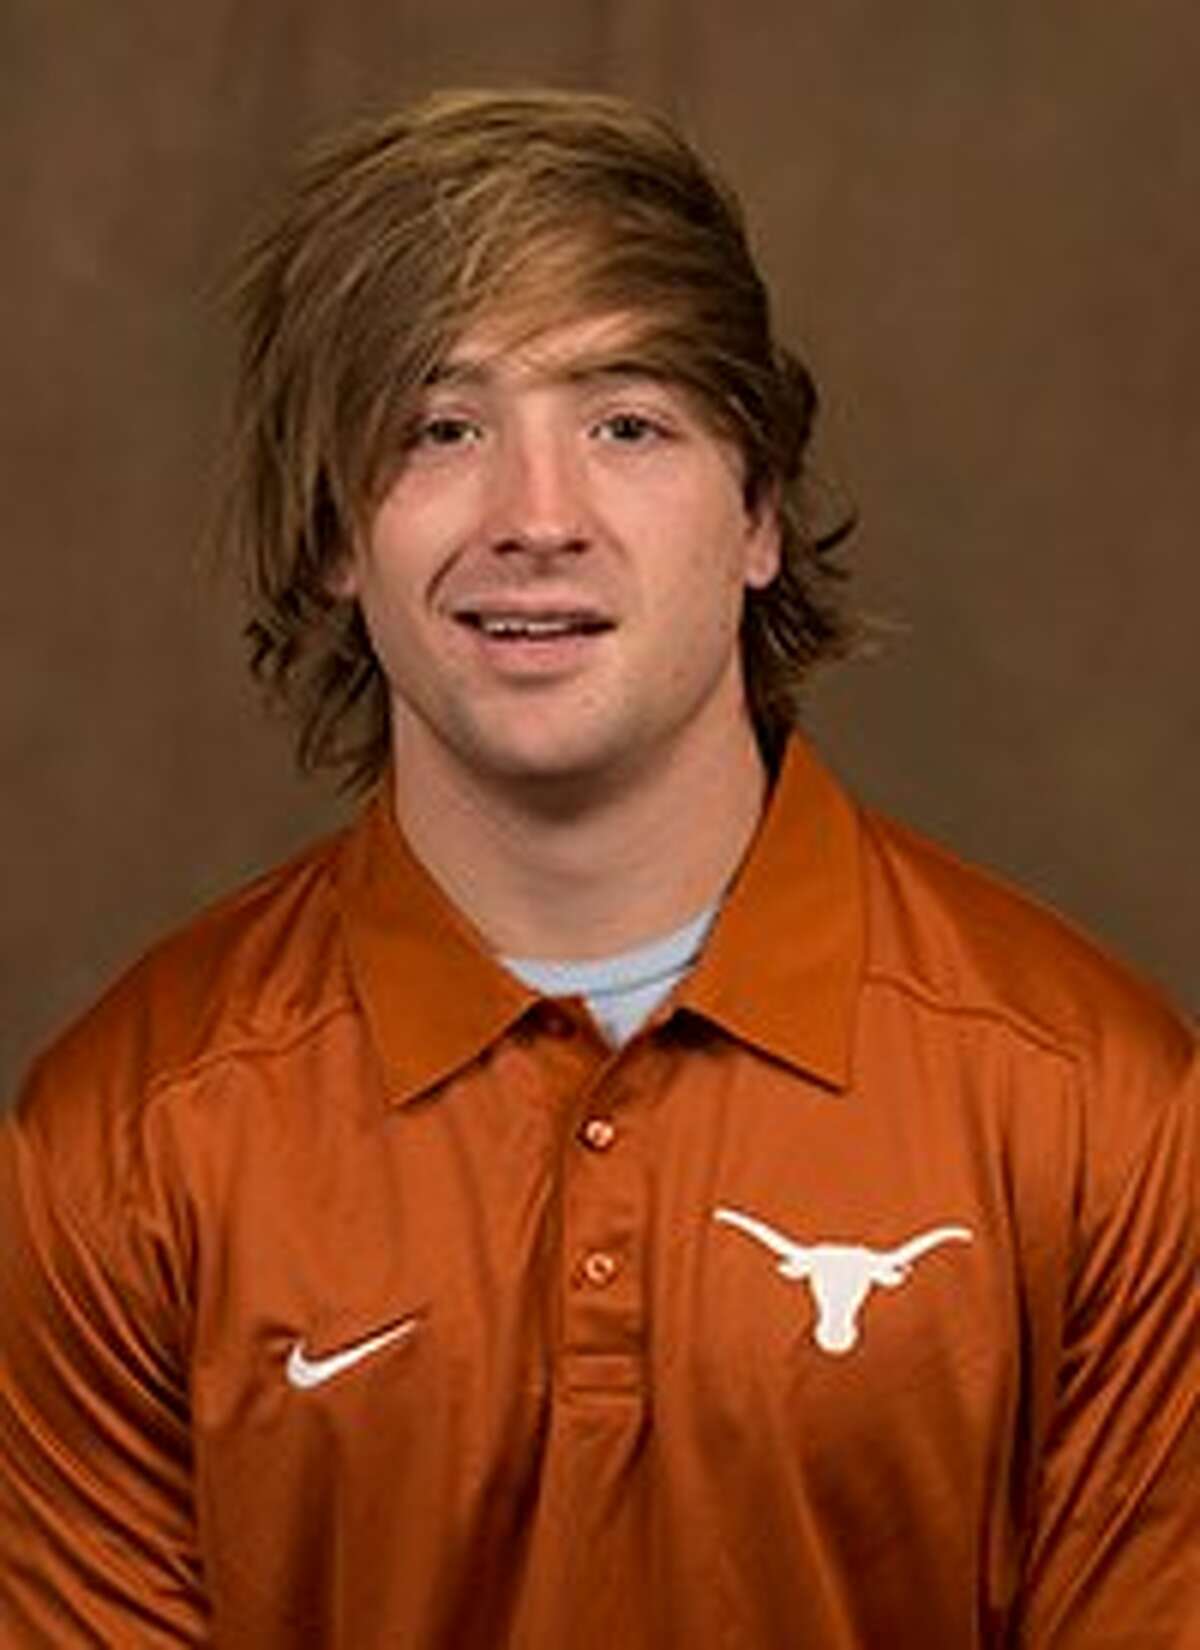 Longhorn kicker Nick Rose's headshot went viral after Web users noticed his unique hairstyle.